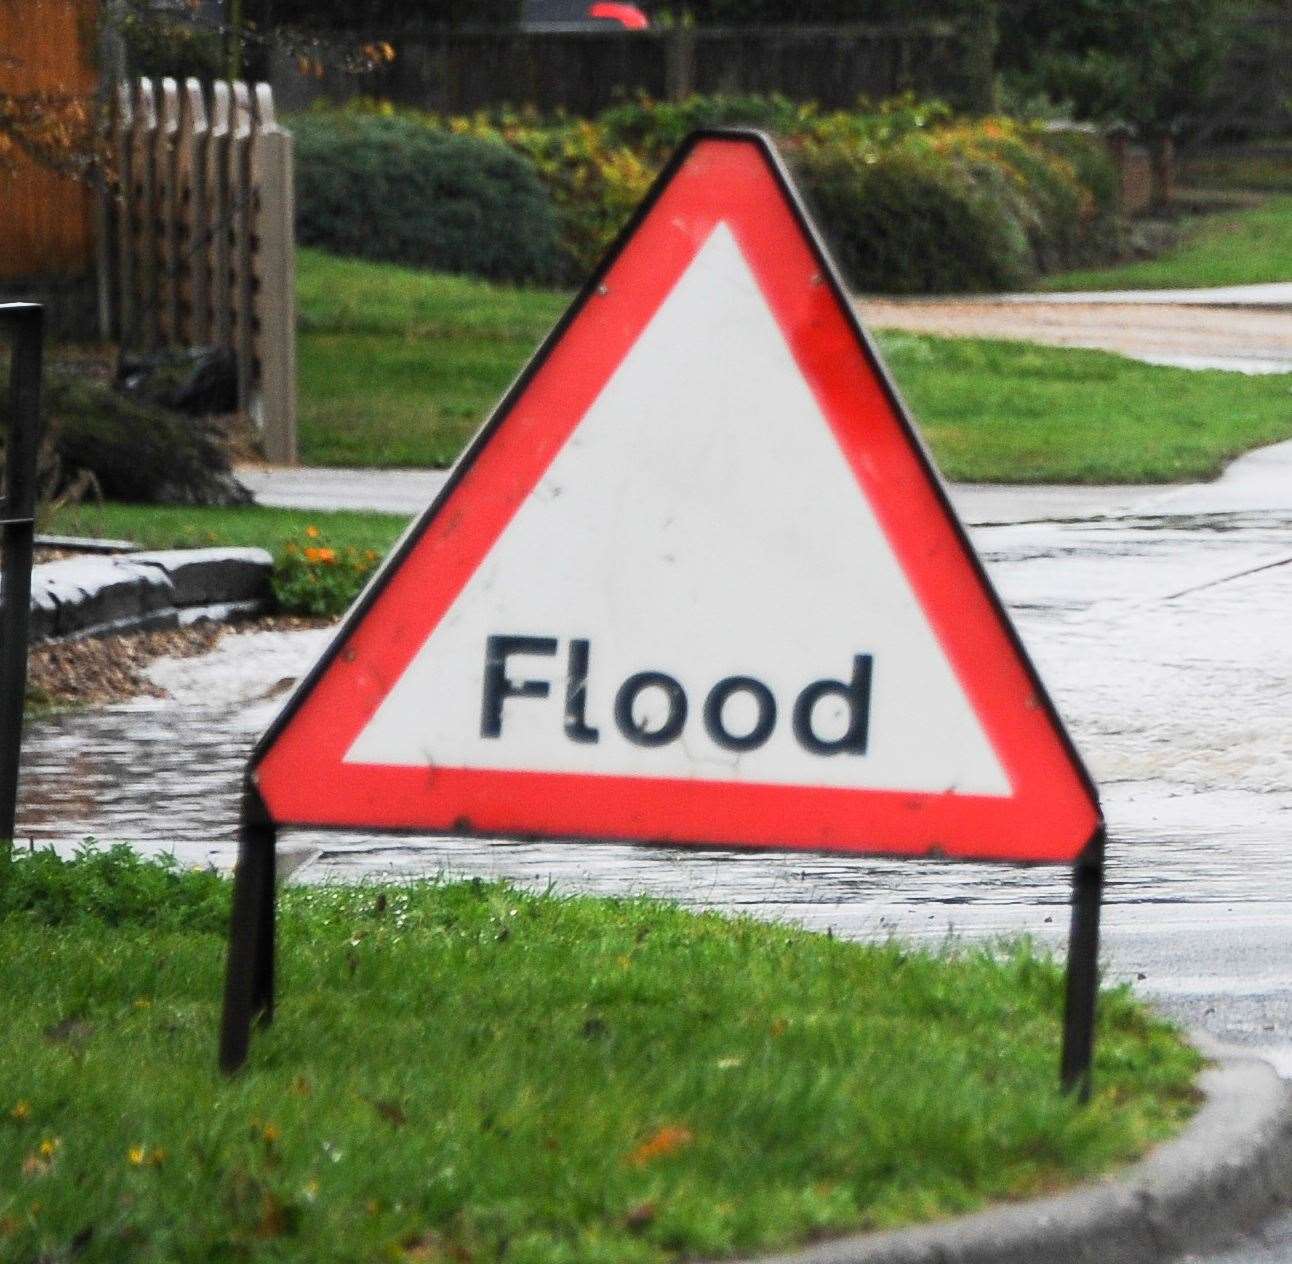 Flooding has closed a road. Stock image